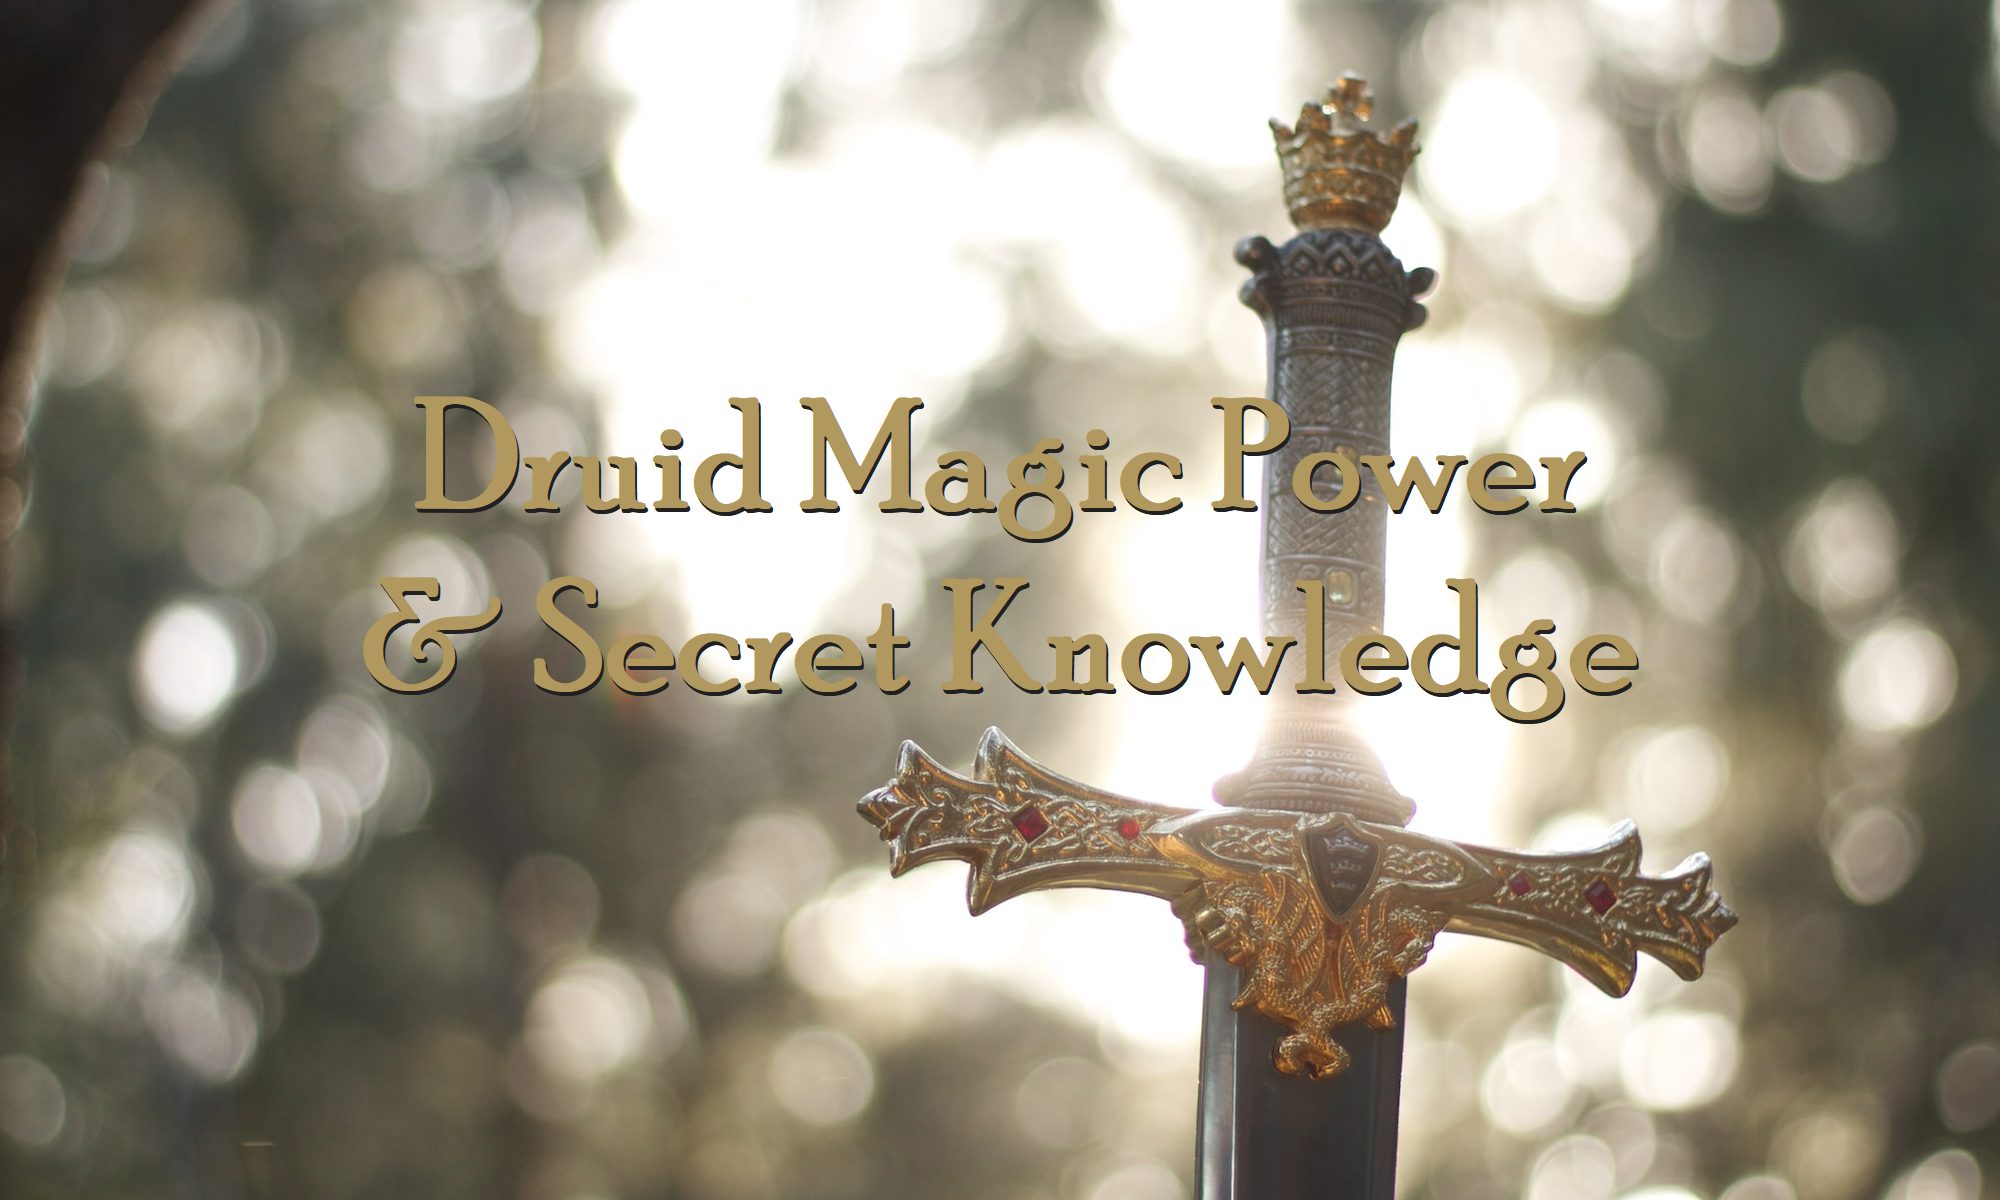 Does Druid Magic Wizards Order of Merlin Exist Secret Knowledge